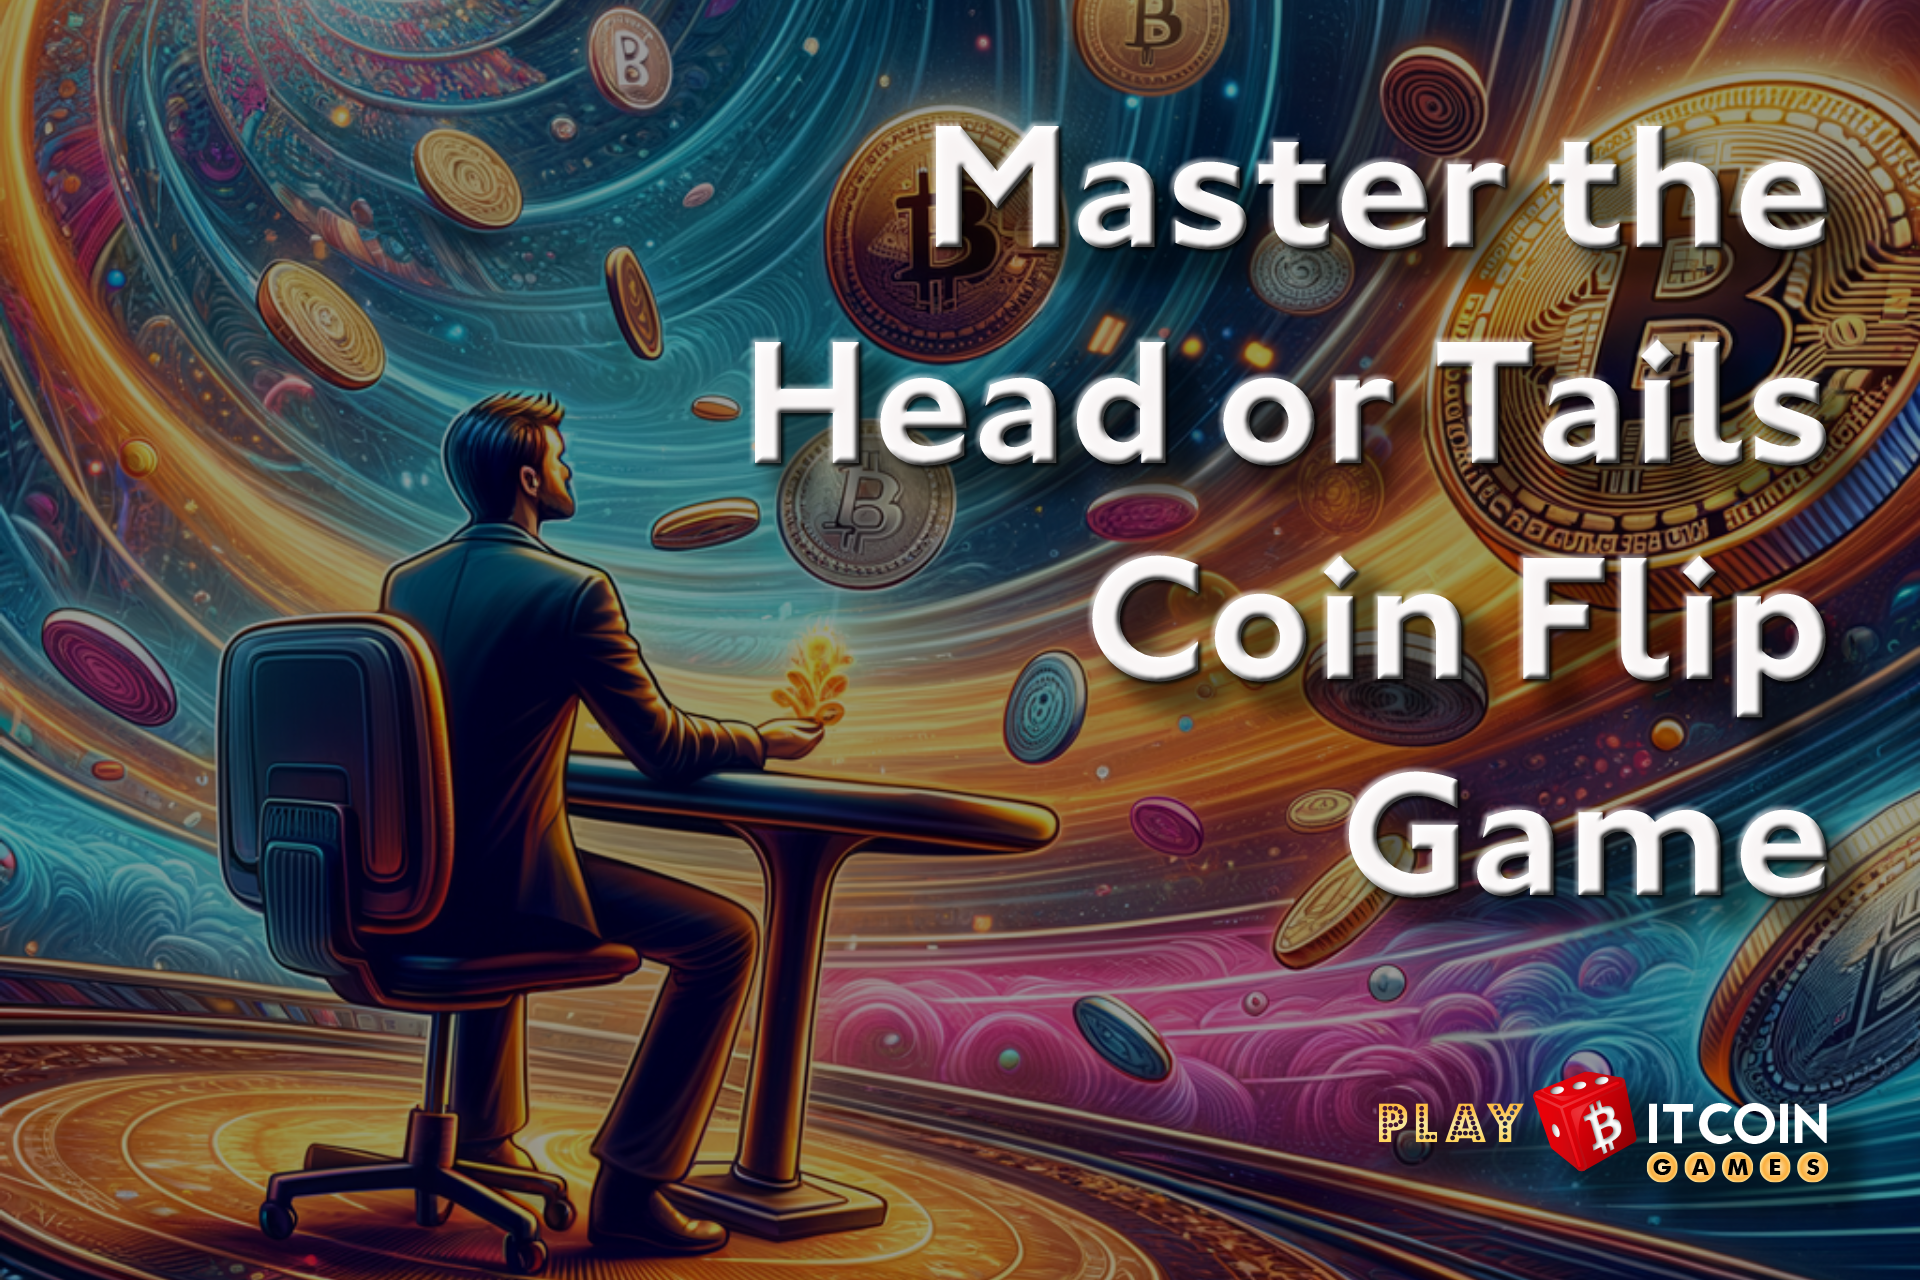 master the head or tails coin flip game - playbitcoingames.com